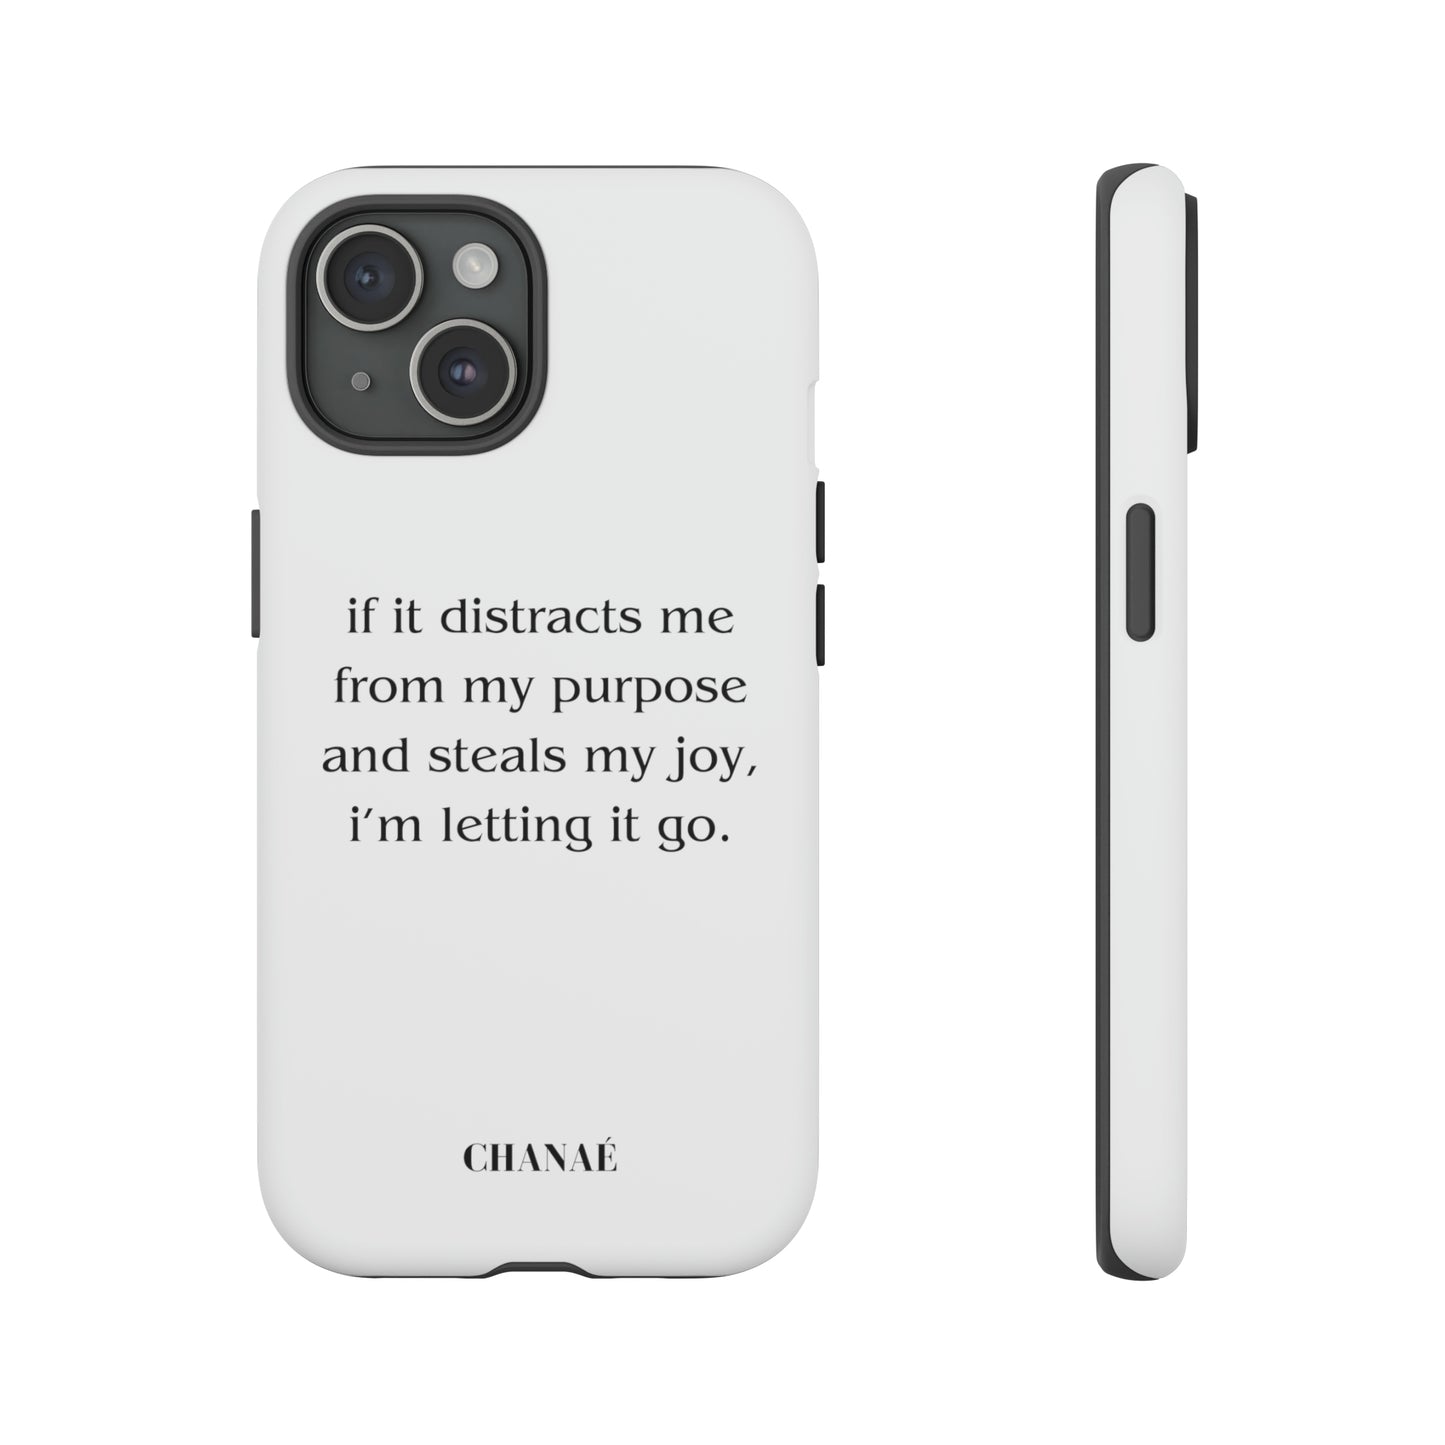 No Distractions iPhone "Tough" Case (White)